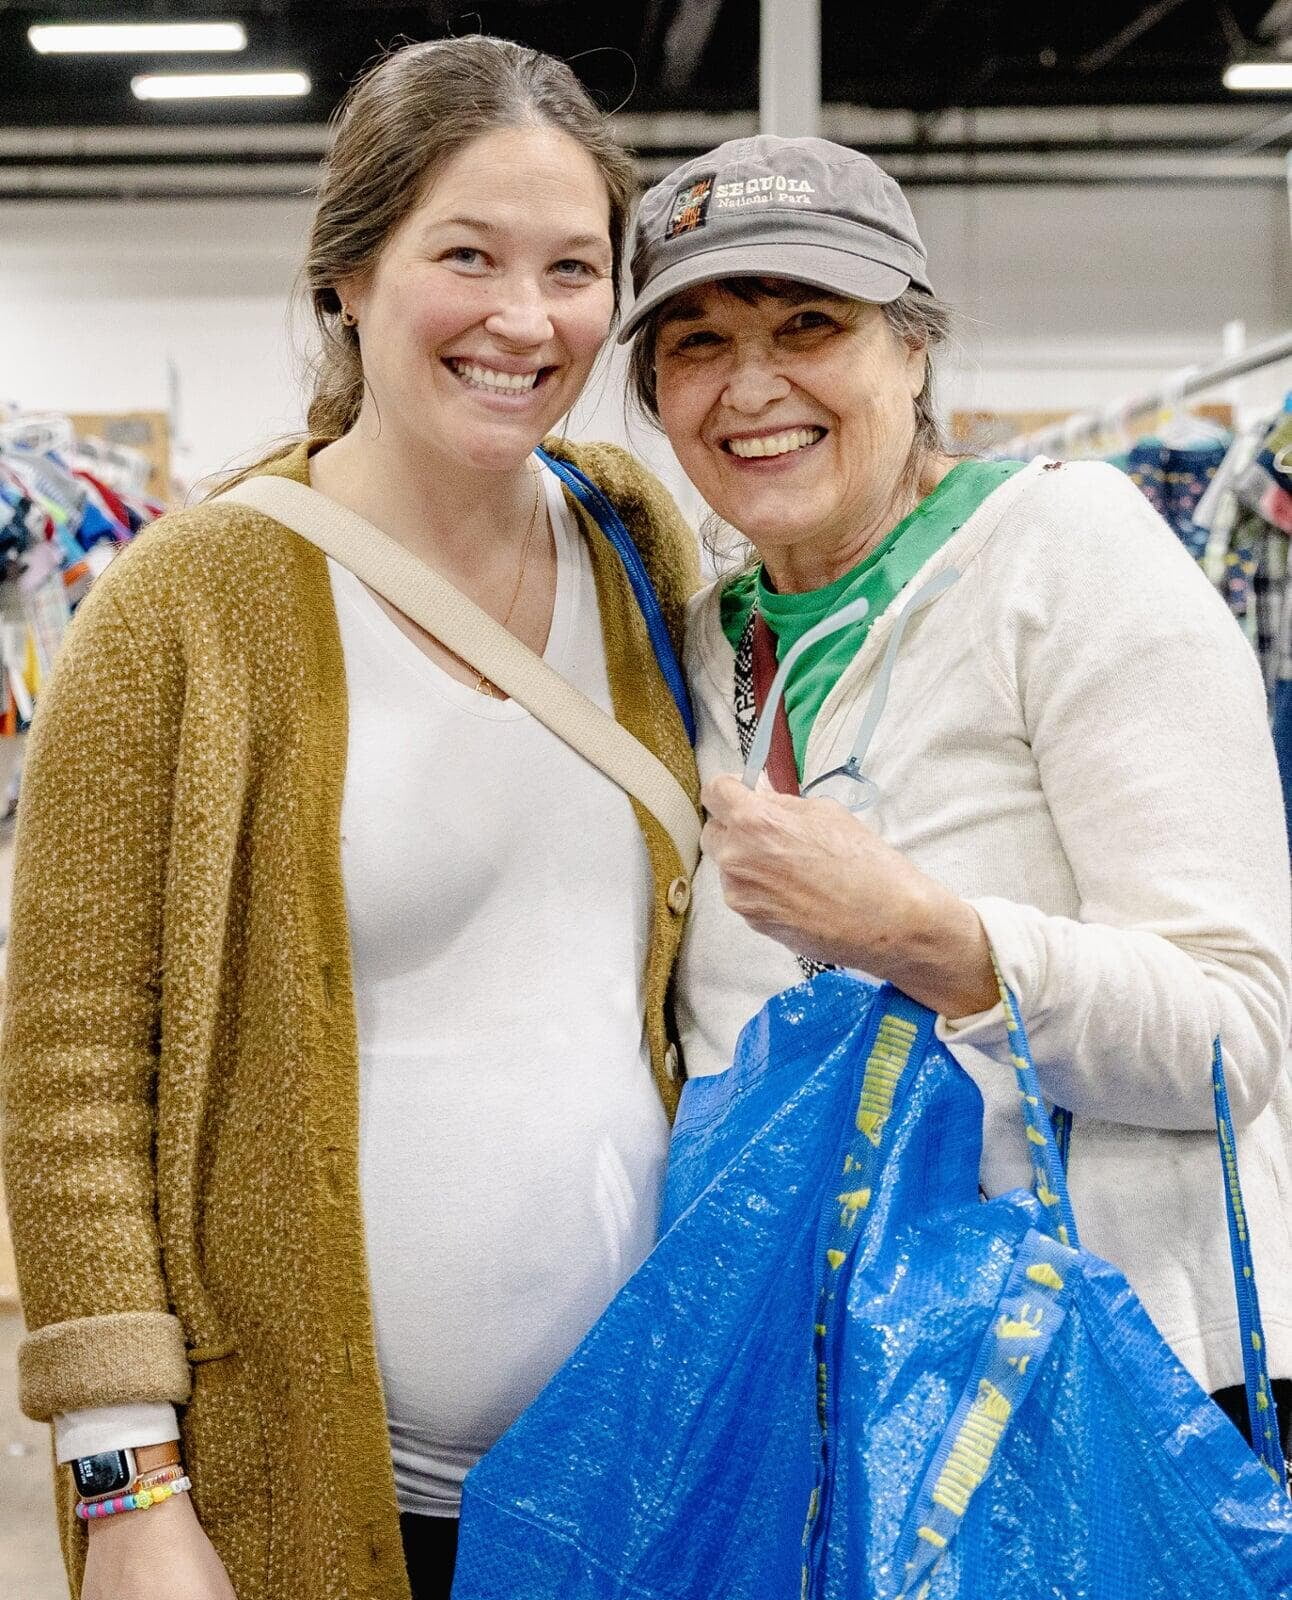 Two women hold up items they found at the JBF sale